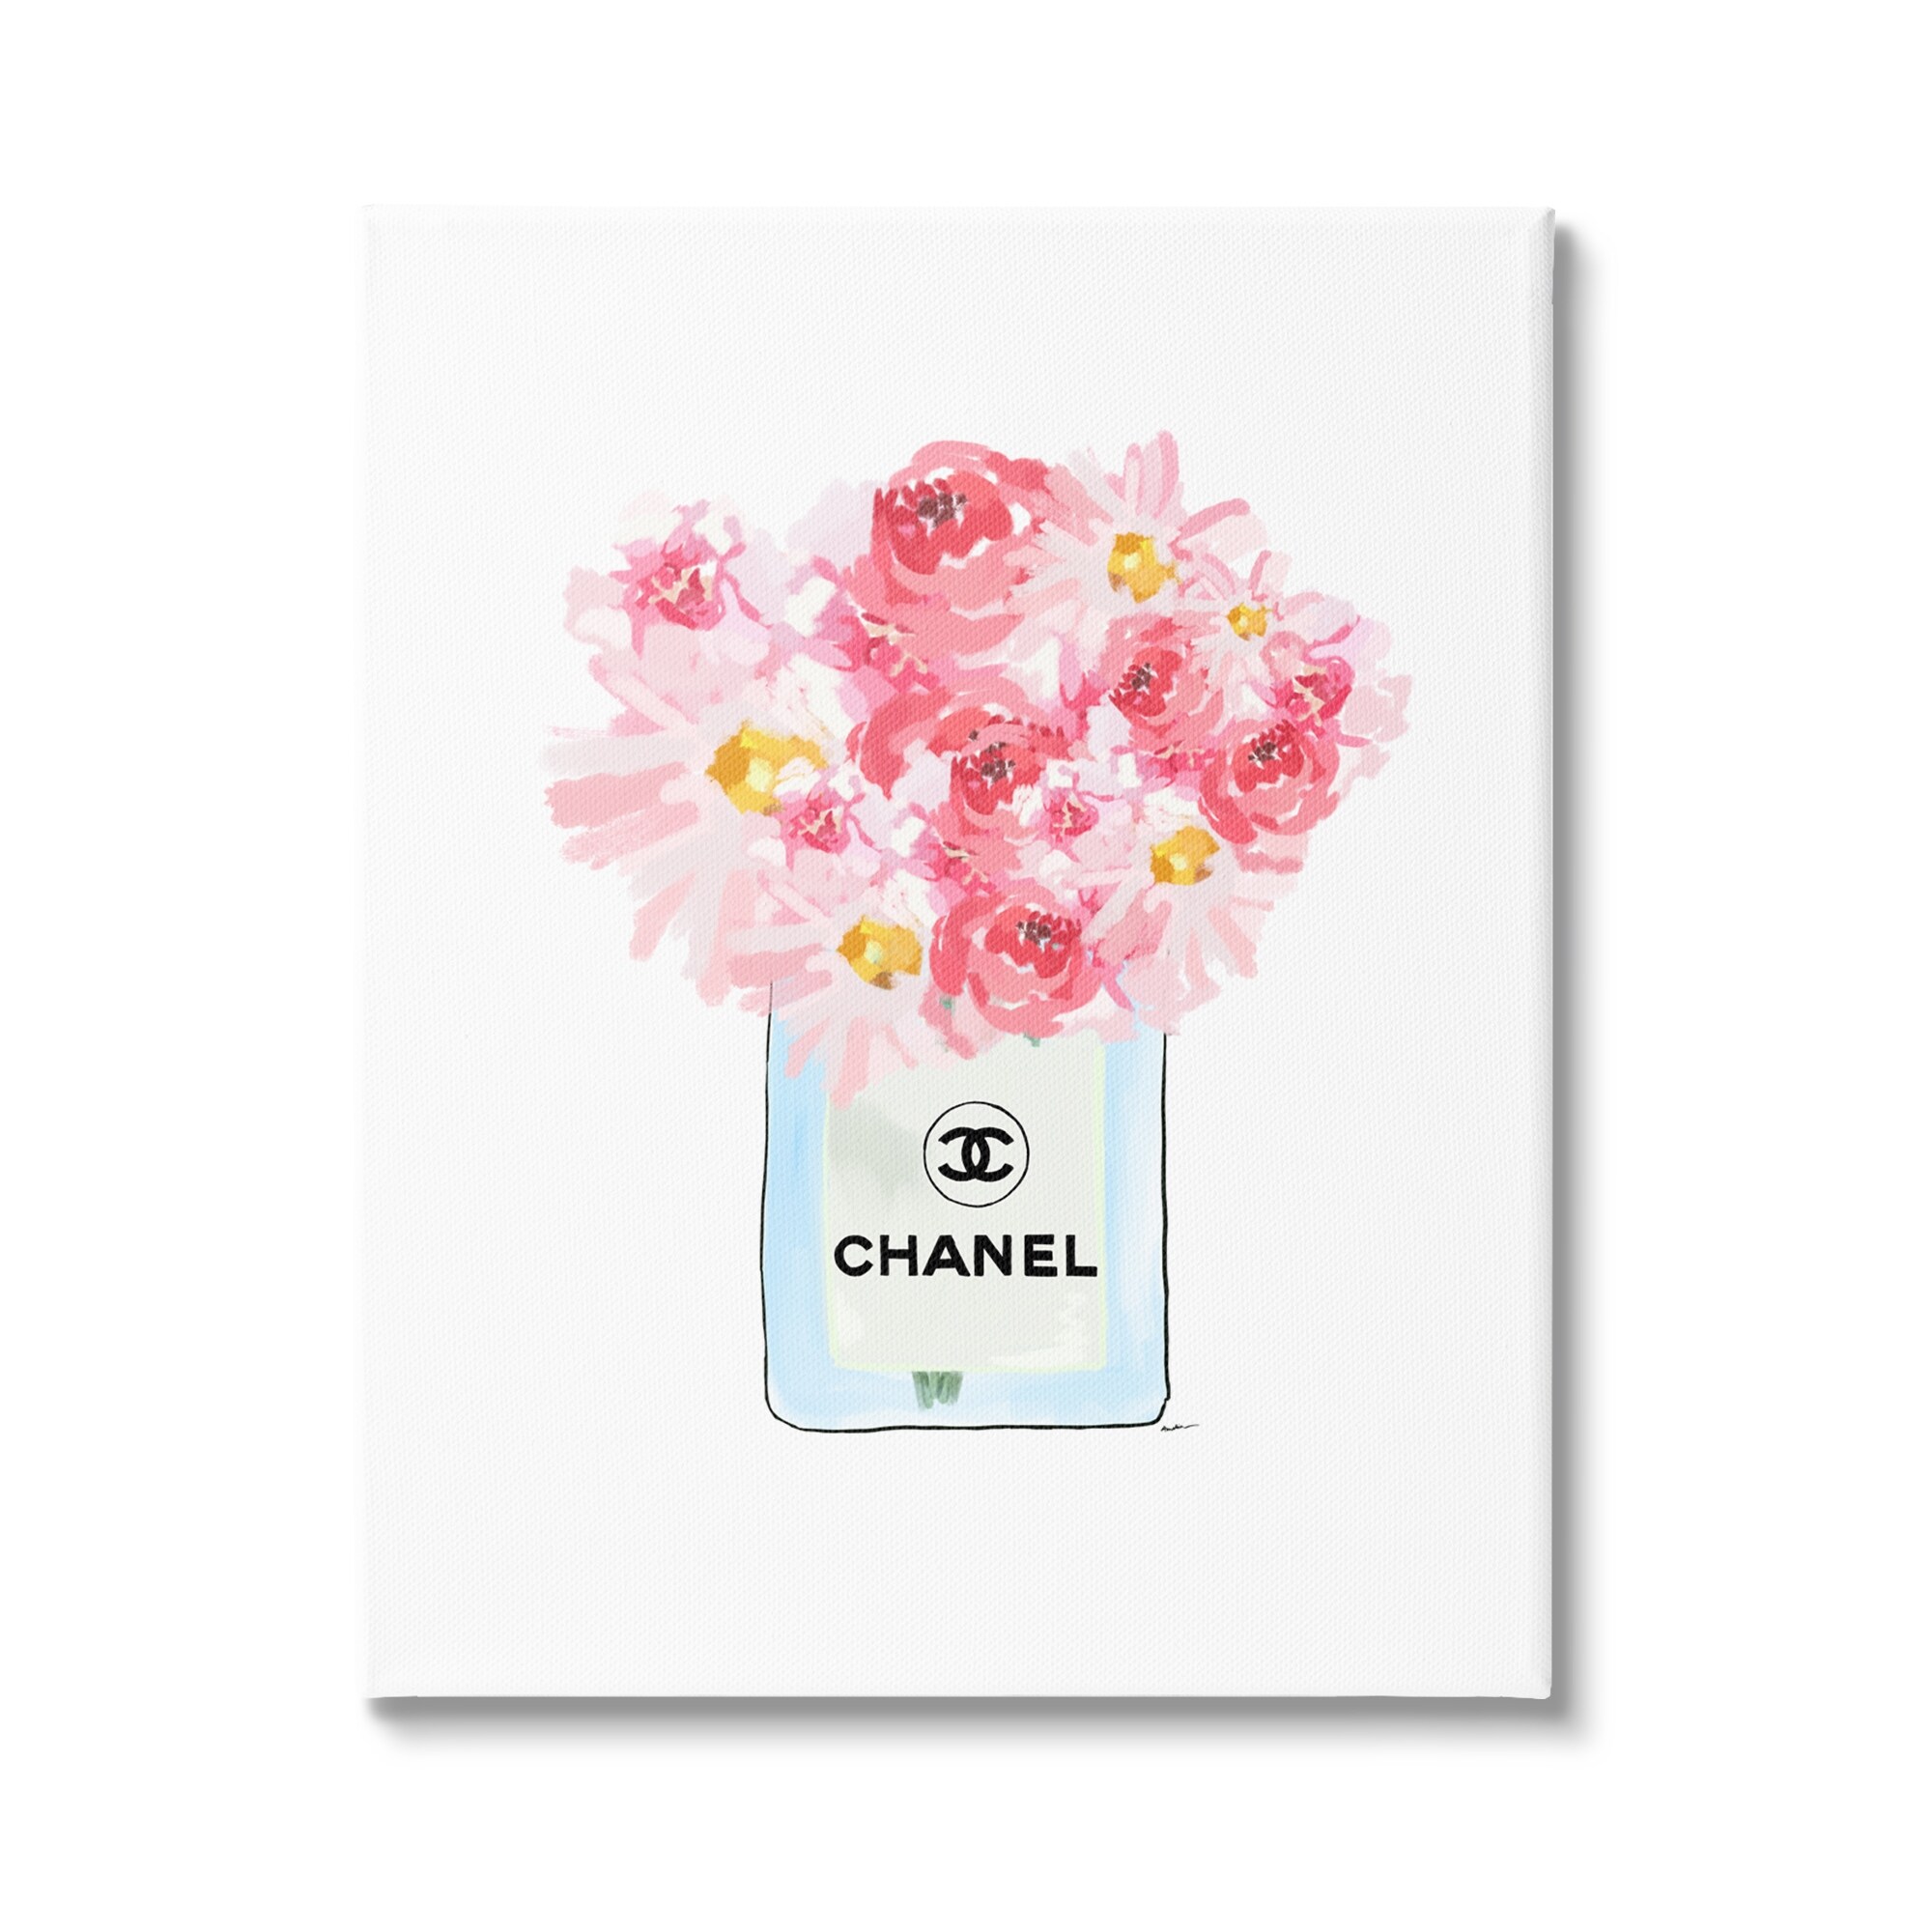 Stupell Industries Pink Rose Bouquet and Fashion Designer Bookstack Canvas Wall Art - 16 x 20